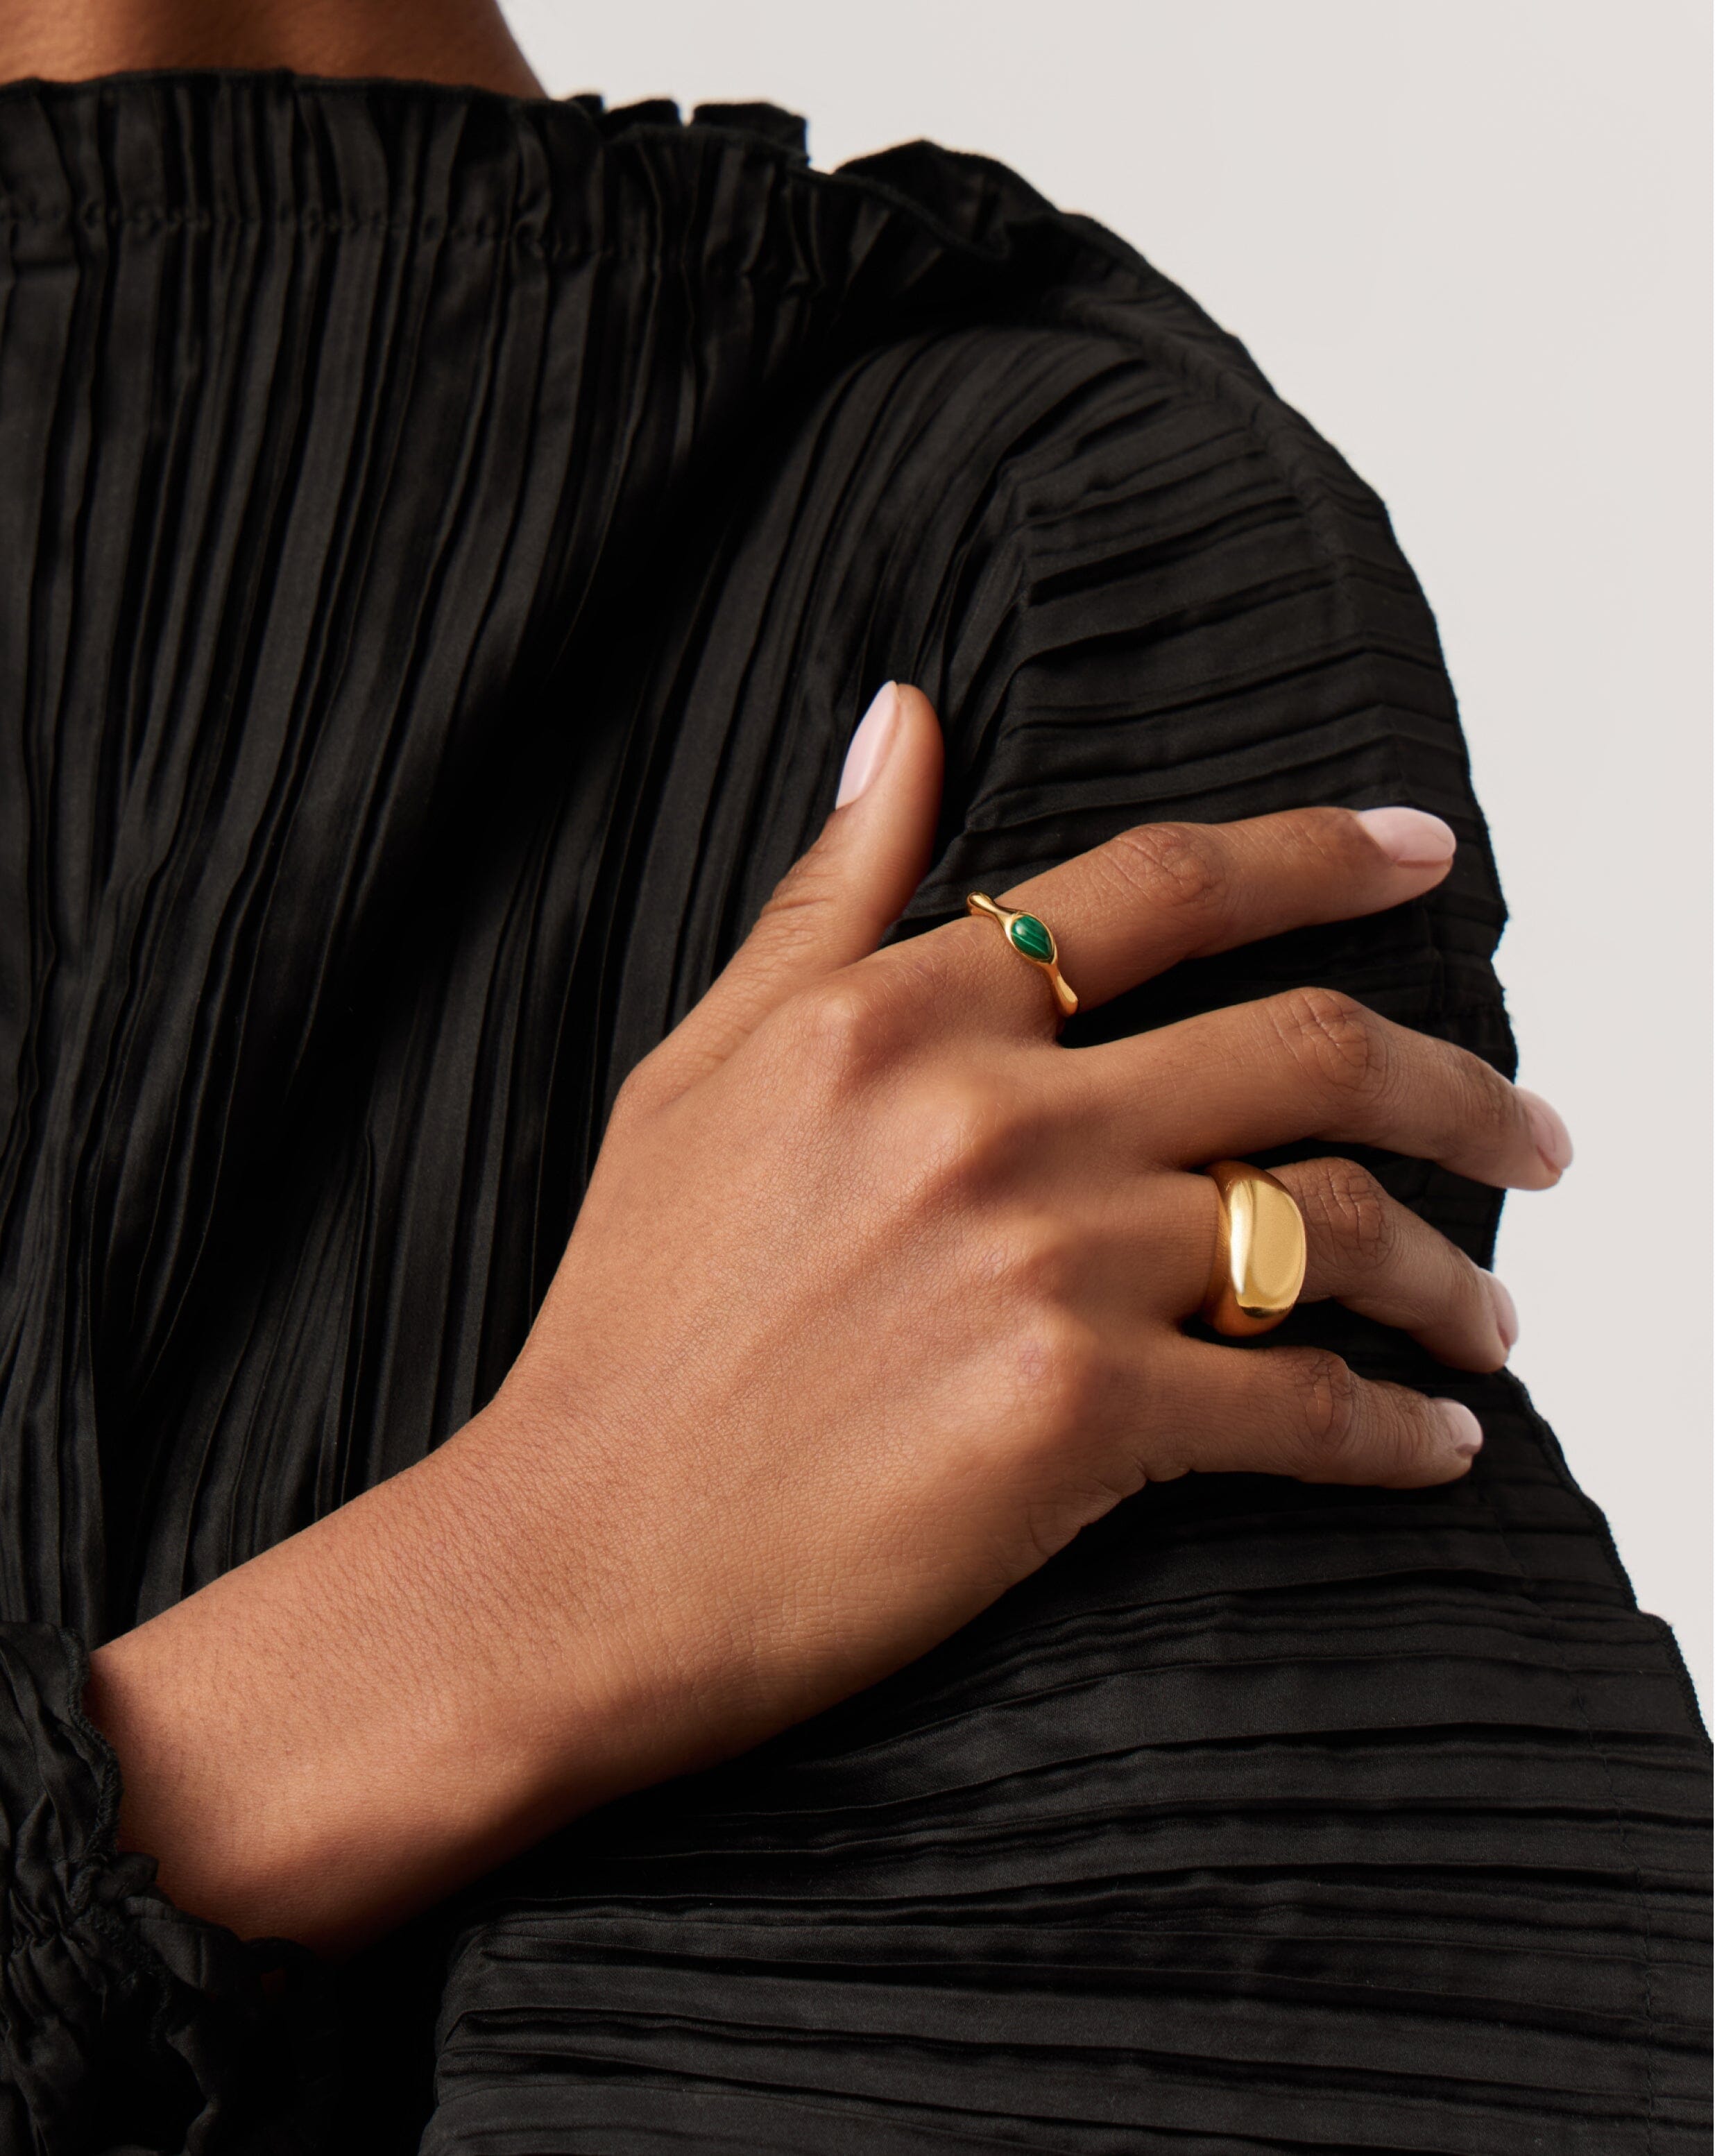 Magma Gemstone Stacking Ring | 18ct Recycled Gold Vermeil on Recycled Sterling Silver Rings Missoma 